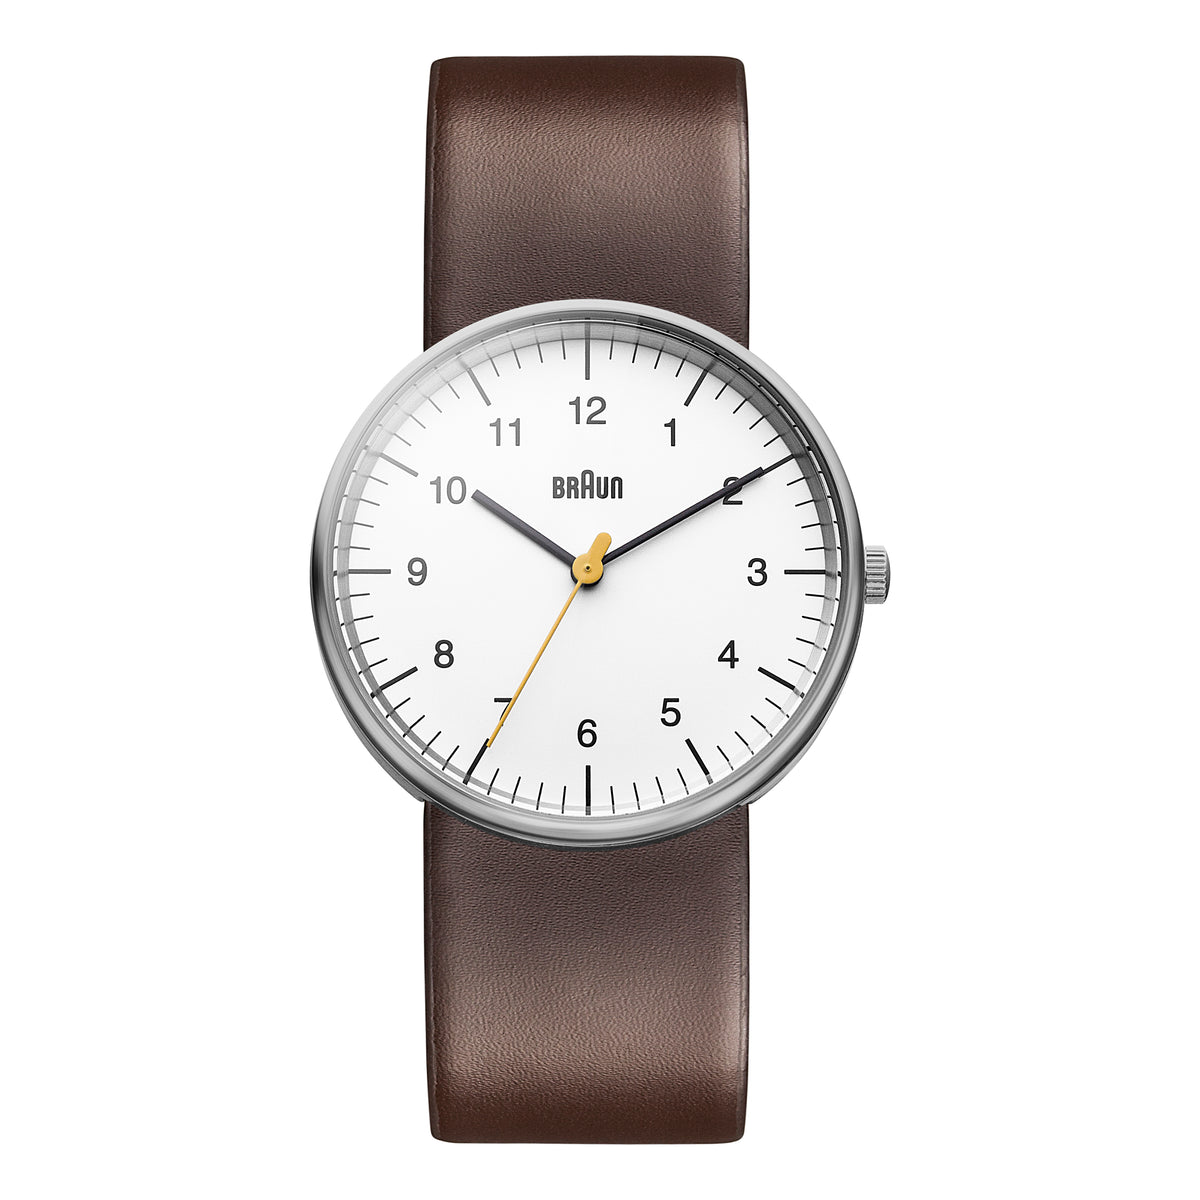 AMEICO - Official U.S. Distributor of Braun Timepieces